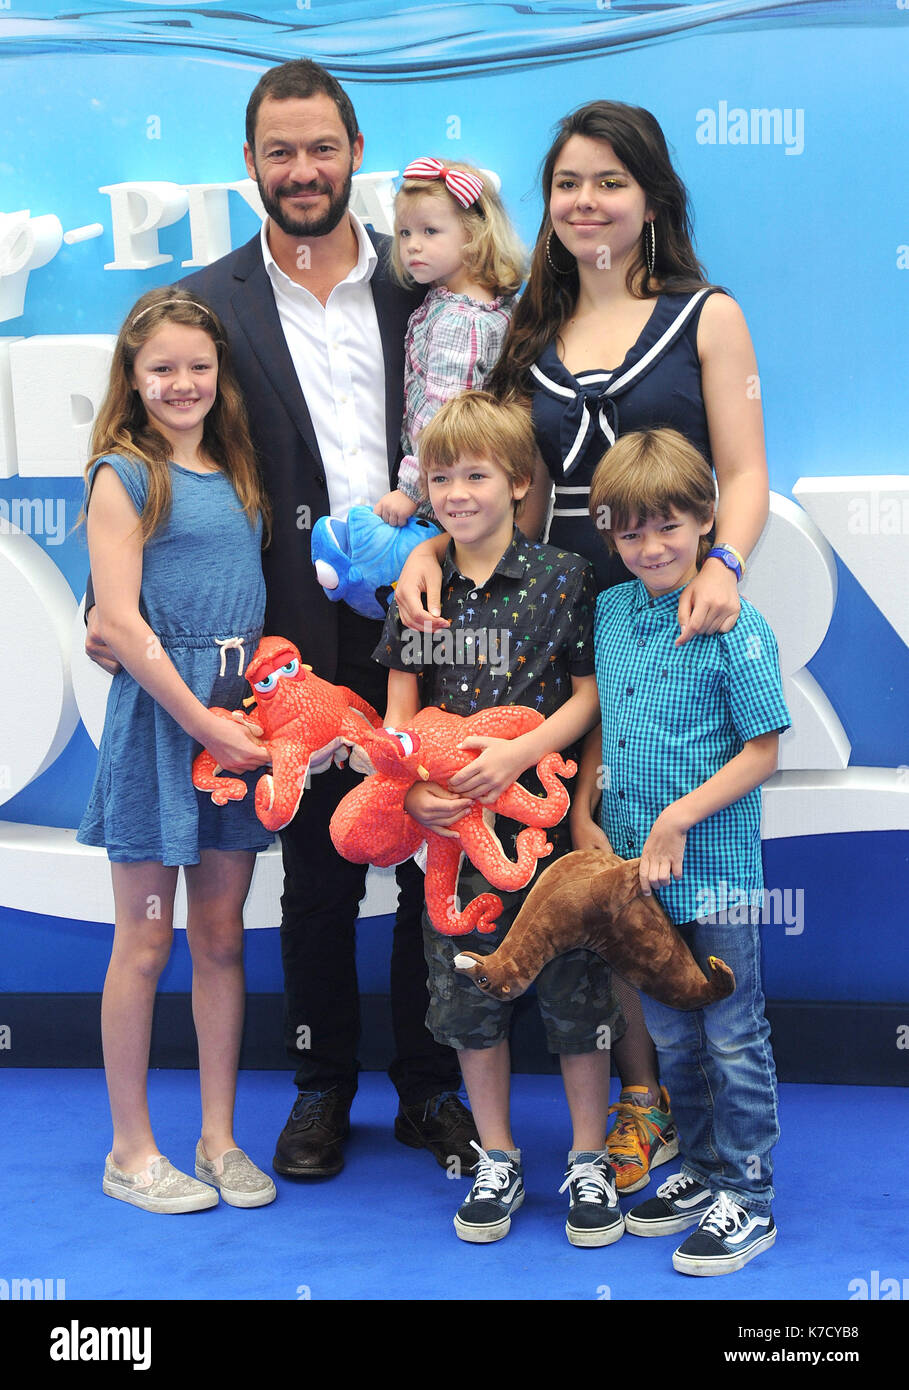 Photo Must Be Credited ©Alpha Press 080001 10/07/2016 Dominic West and Children Martha West, Dora West, Senan West, Francis West Finding Dory Premiere at Odeon Leicester Square London Stock Photo